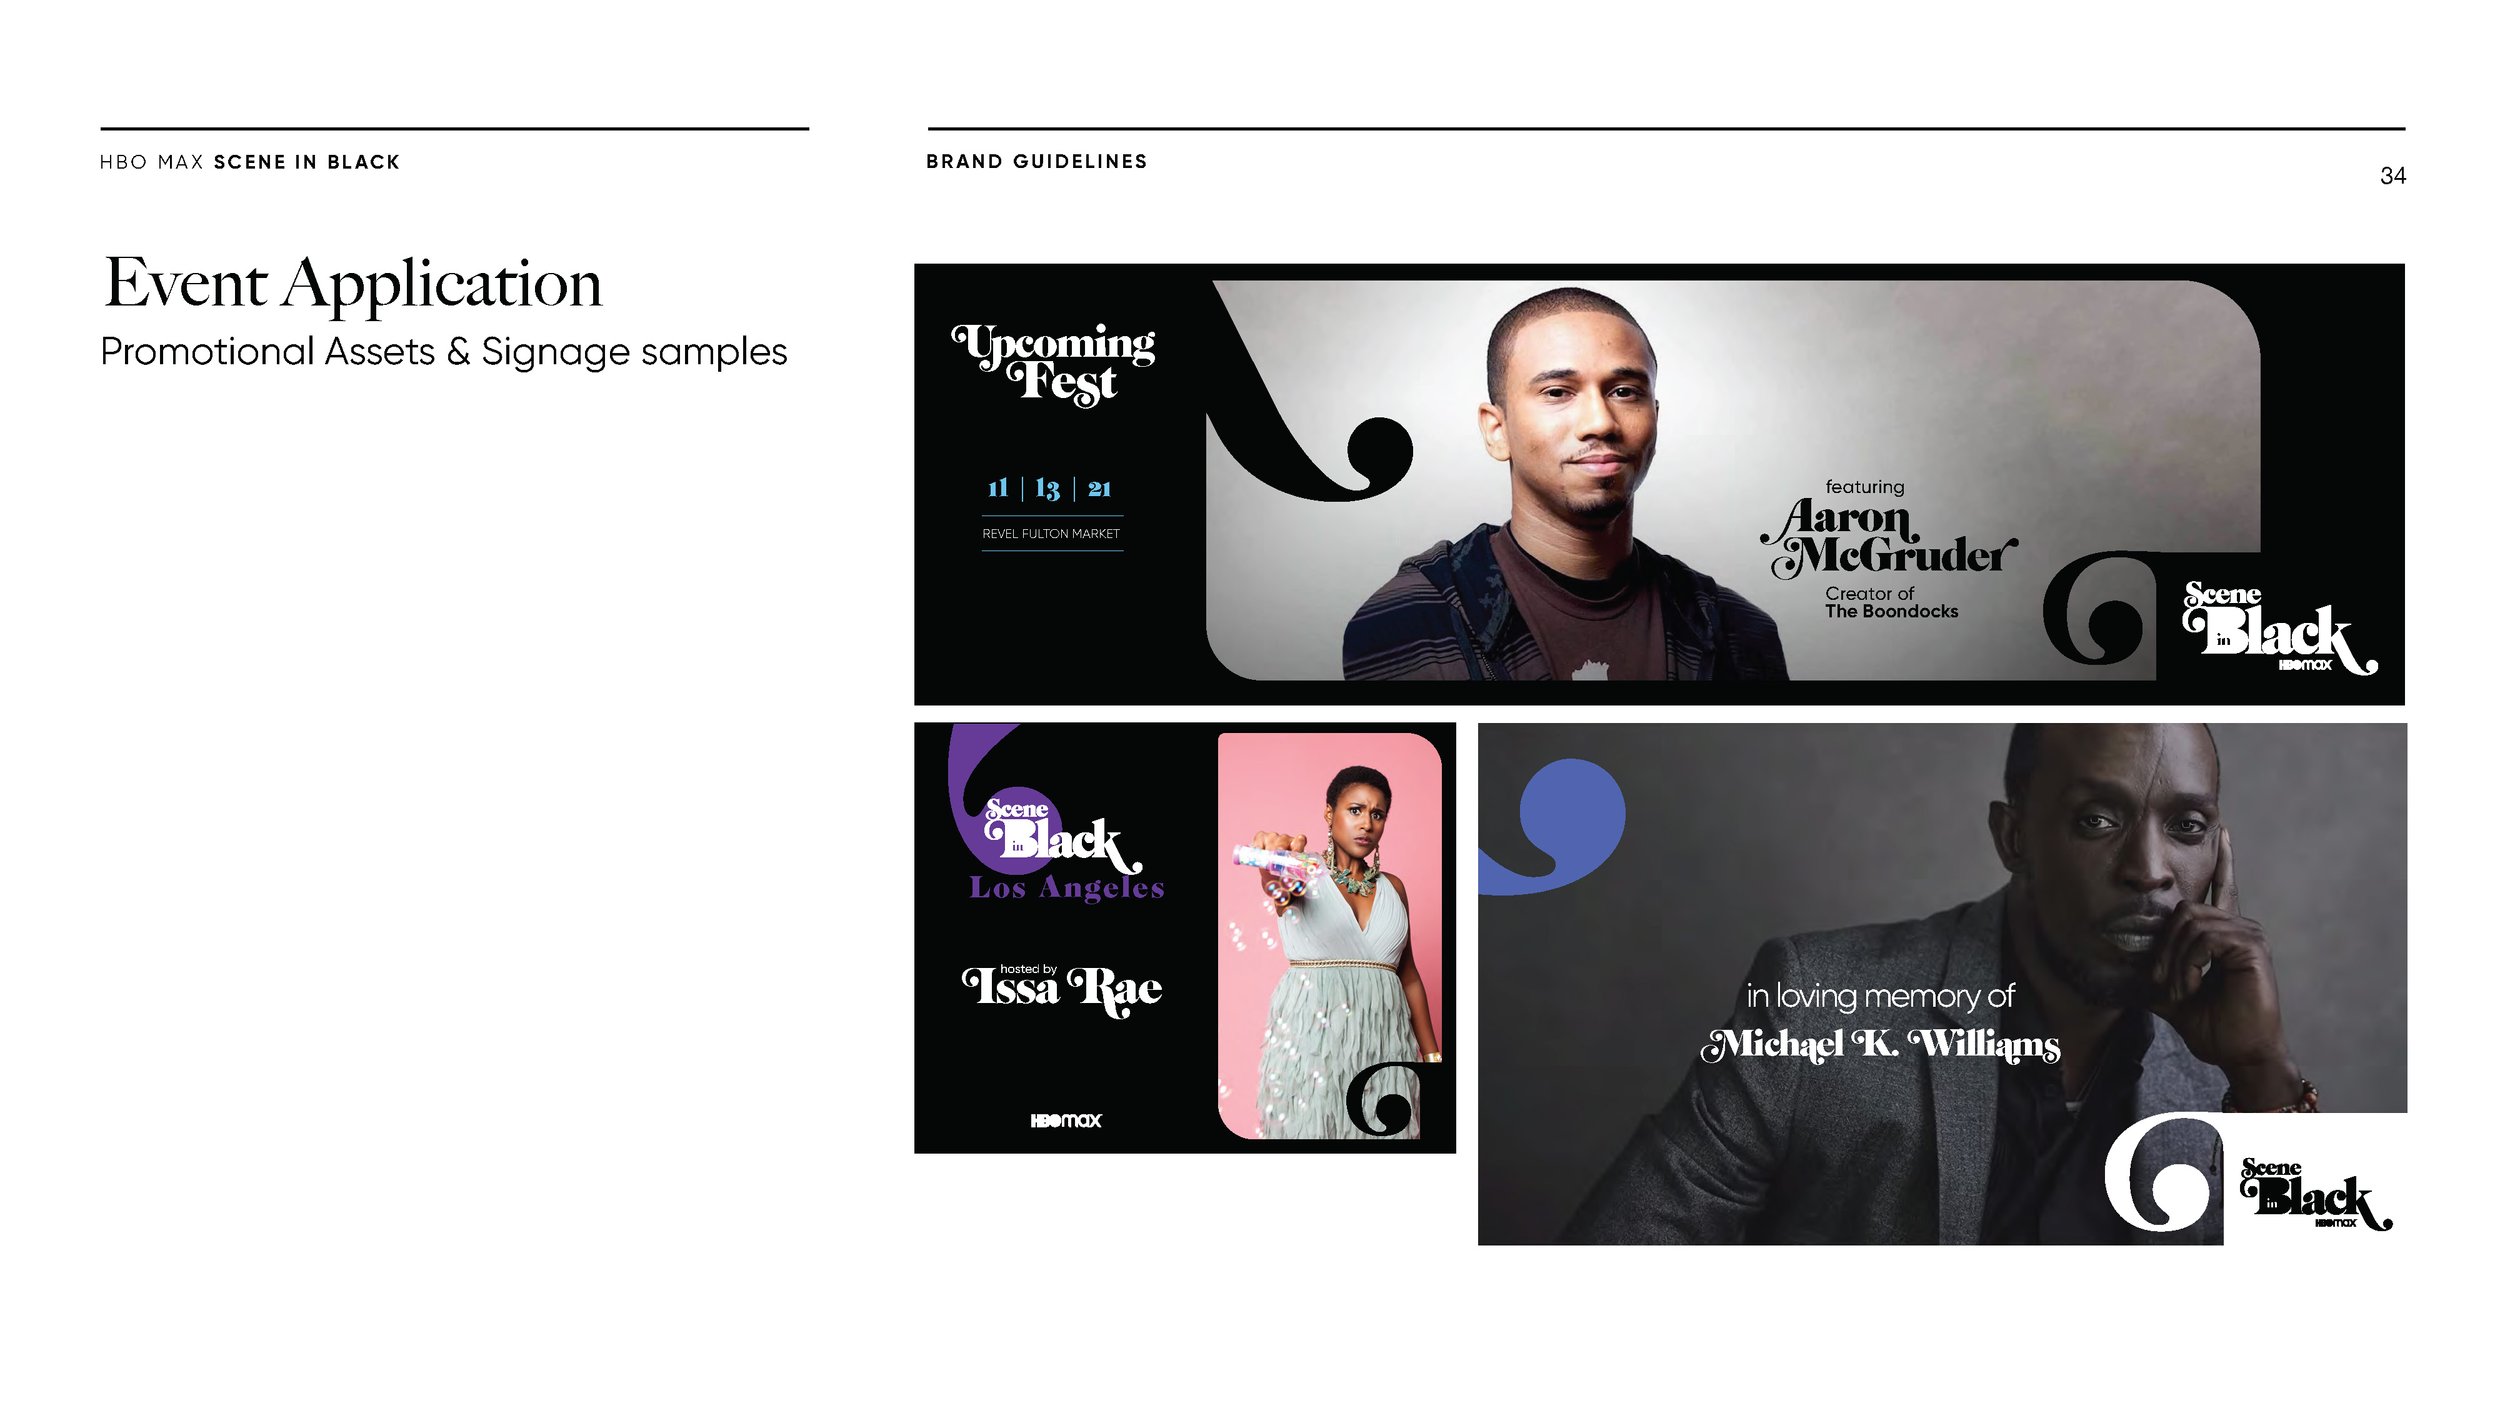 HBOMax_SceneinBlack | Brand Guidelines | Final Oct21_Page_34.jpg